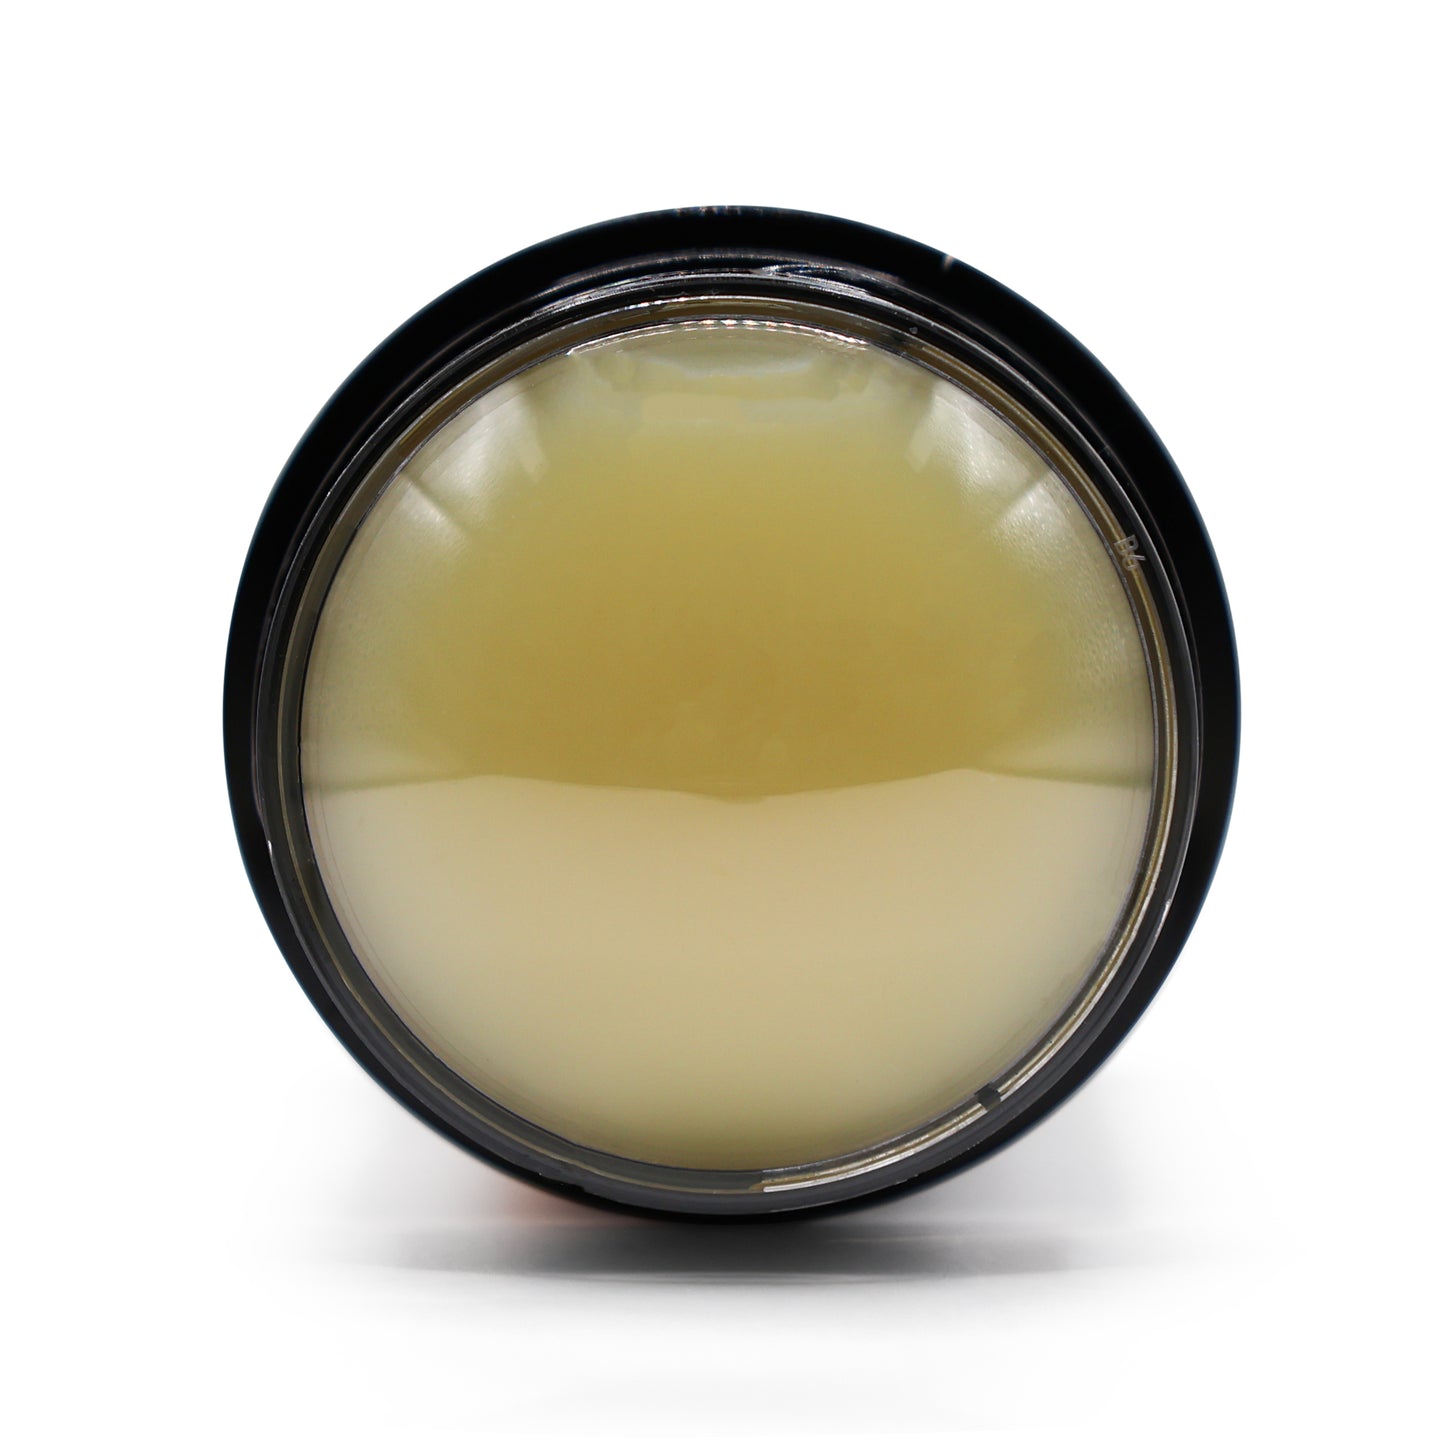 Skin Rescue Balm - Soothing Mint